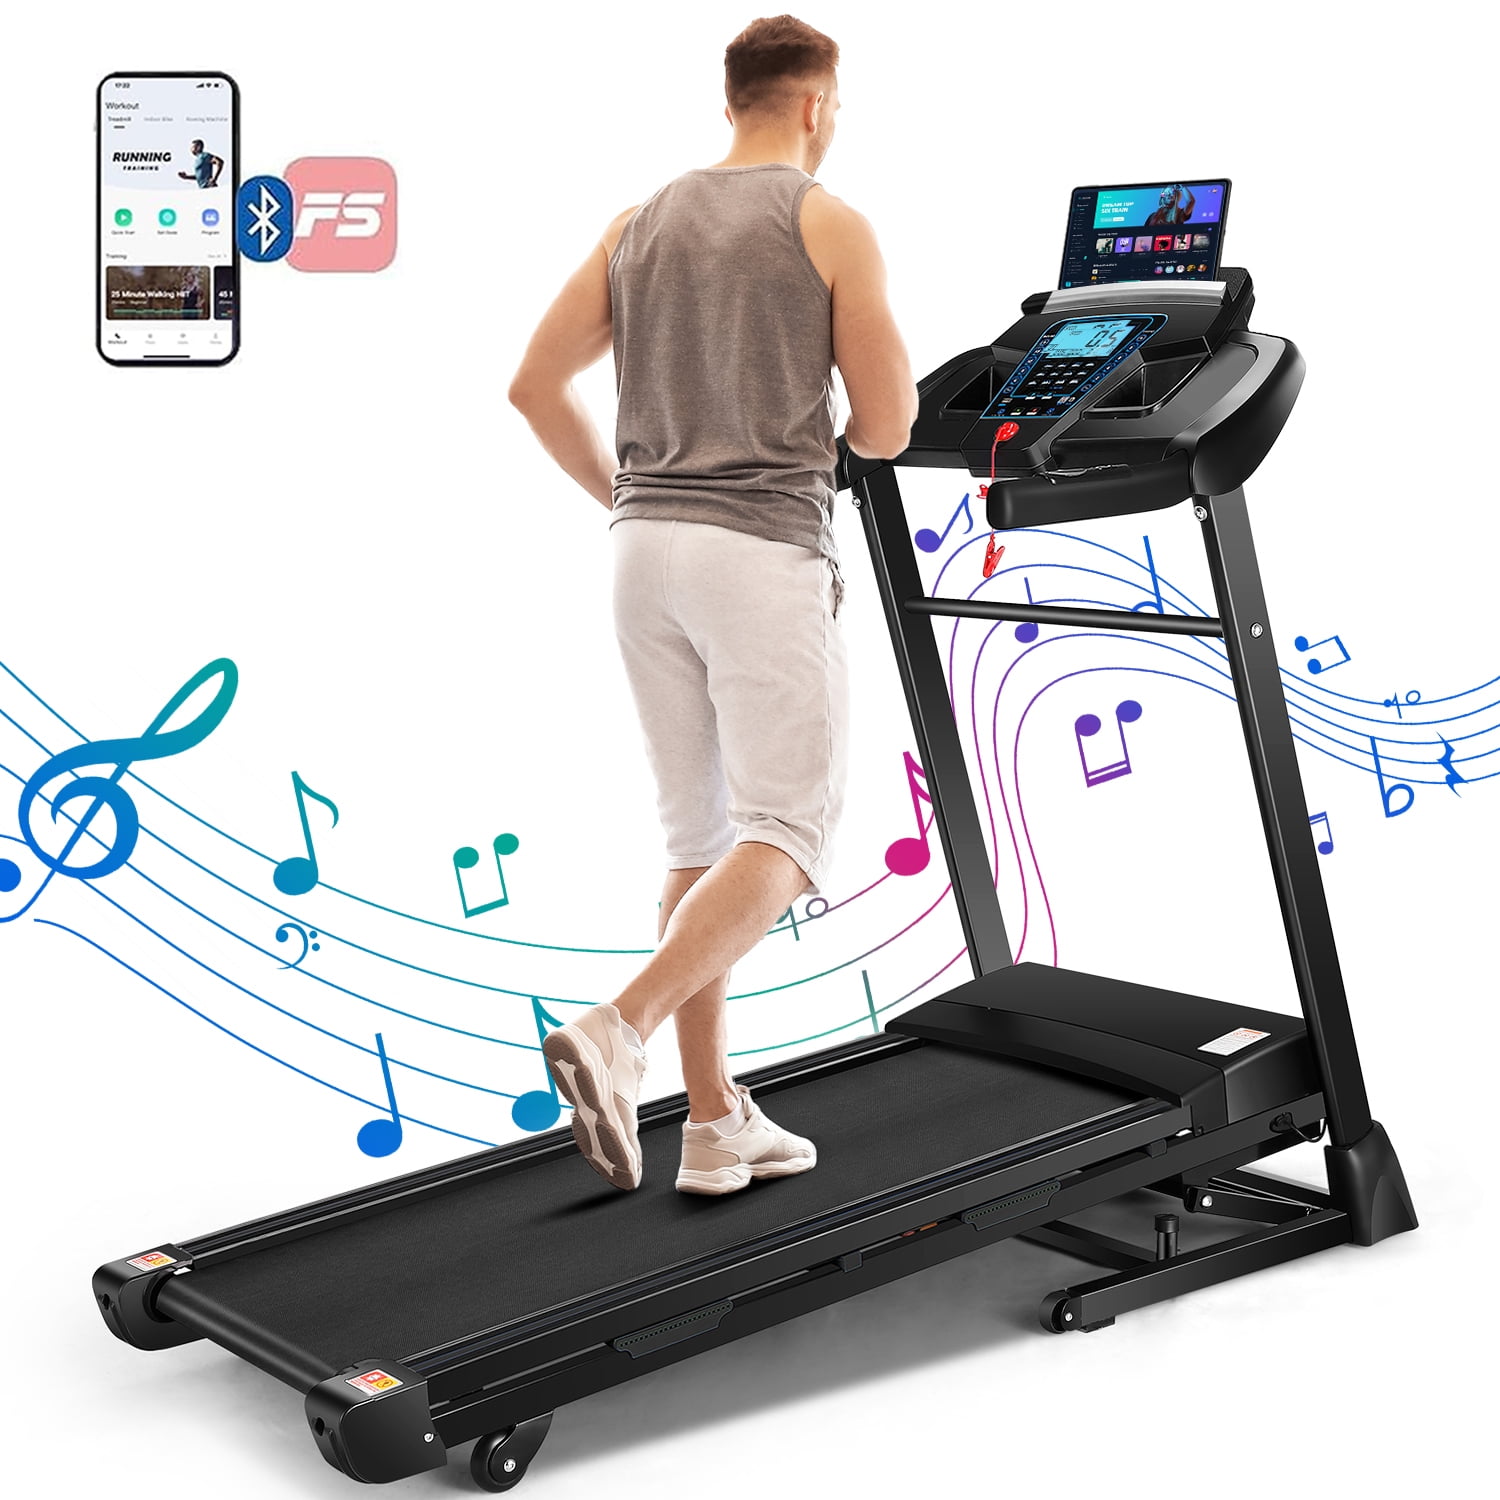 Treadmill 300 lb Capacity, 3.25 HP Automatic Incline Treadmill with APP &  Bluetooth Audio Speakers, Electric Folding Treadmills for Home Office Gym